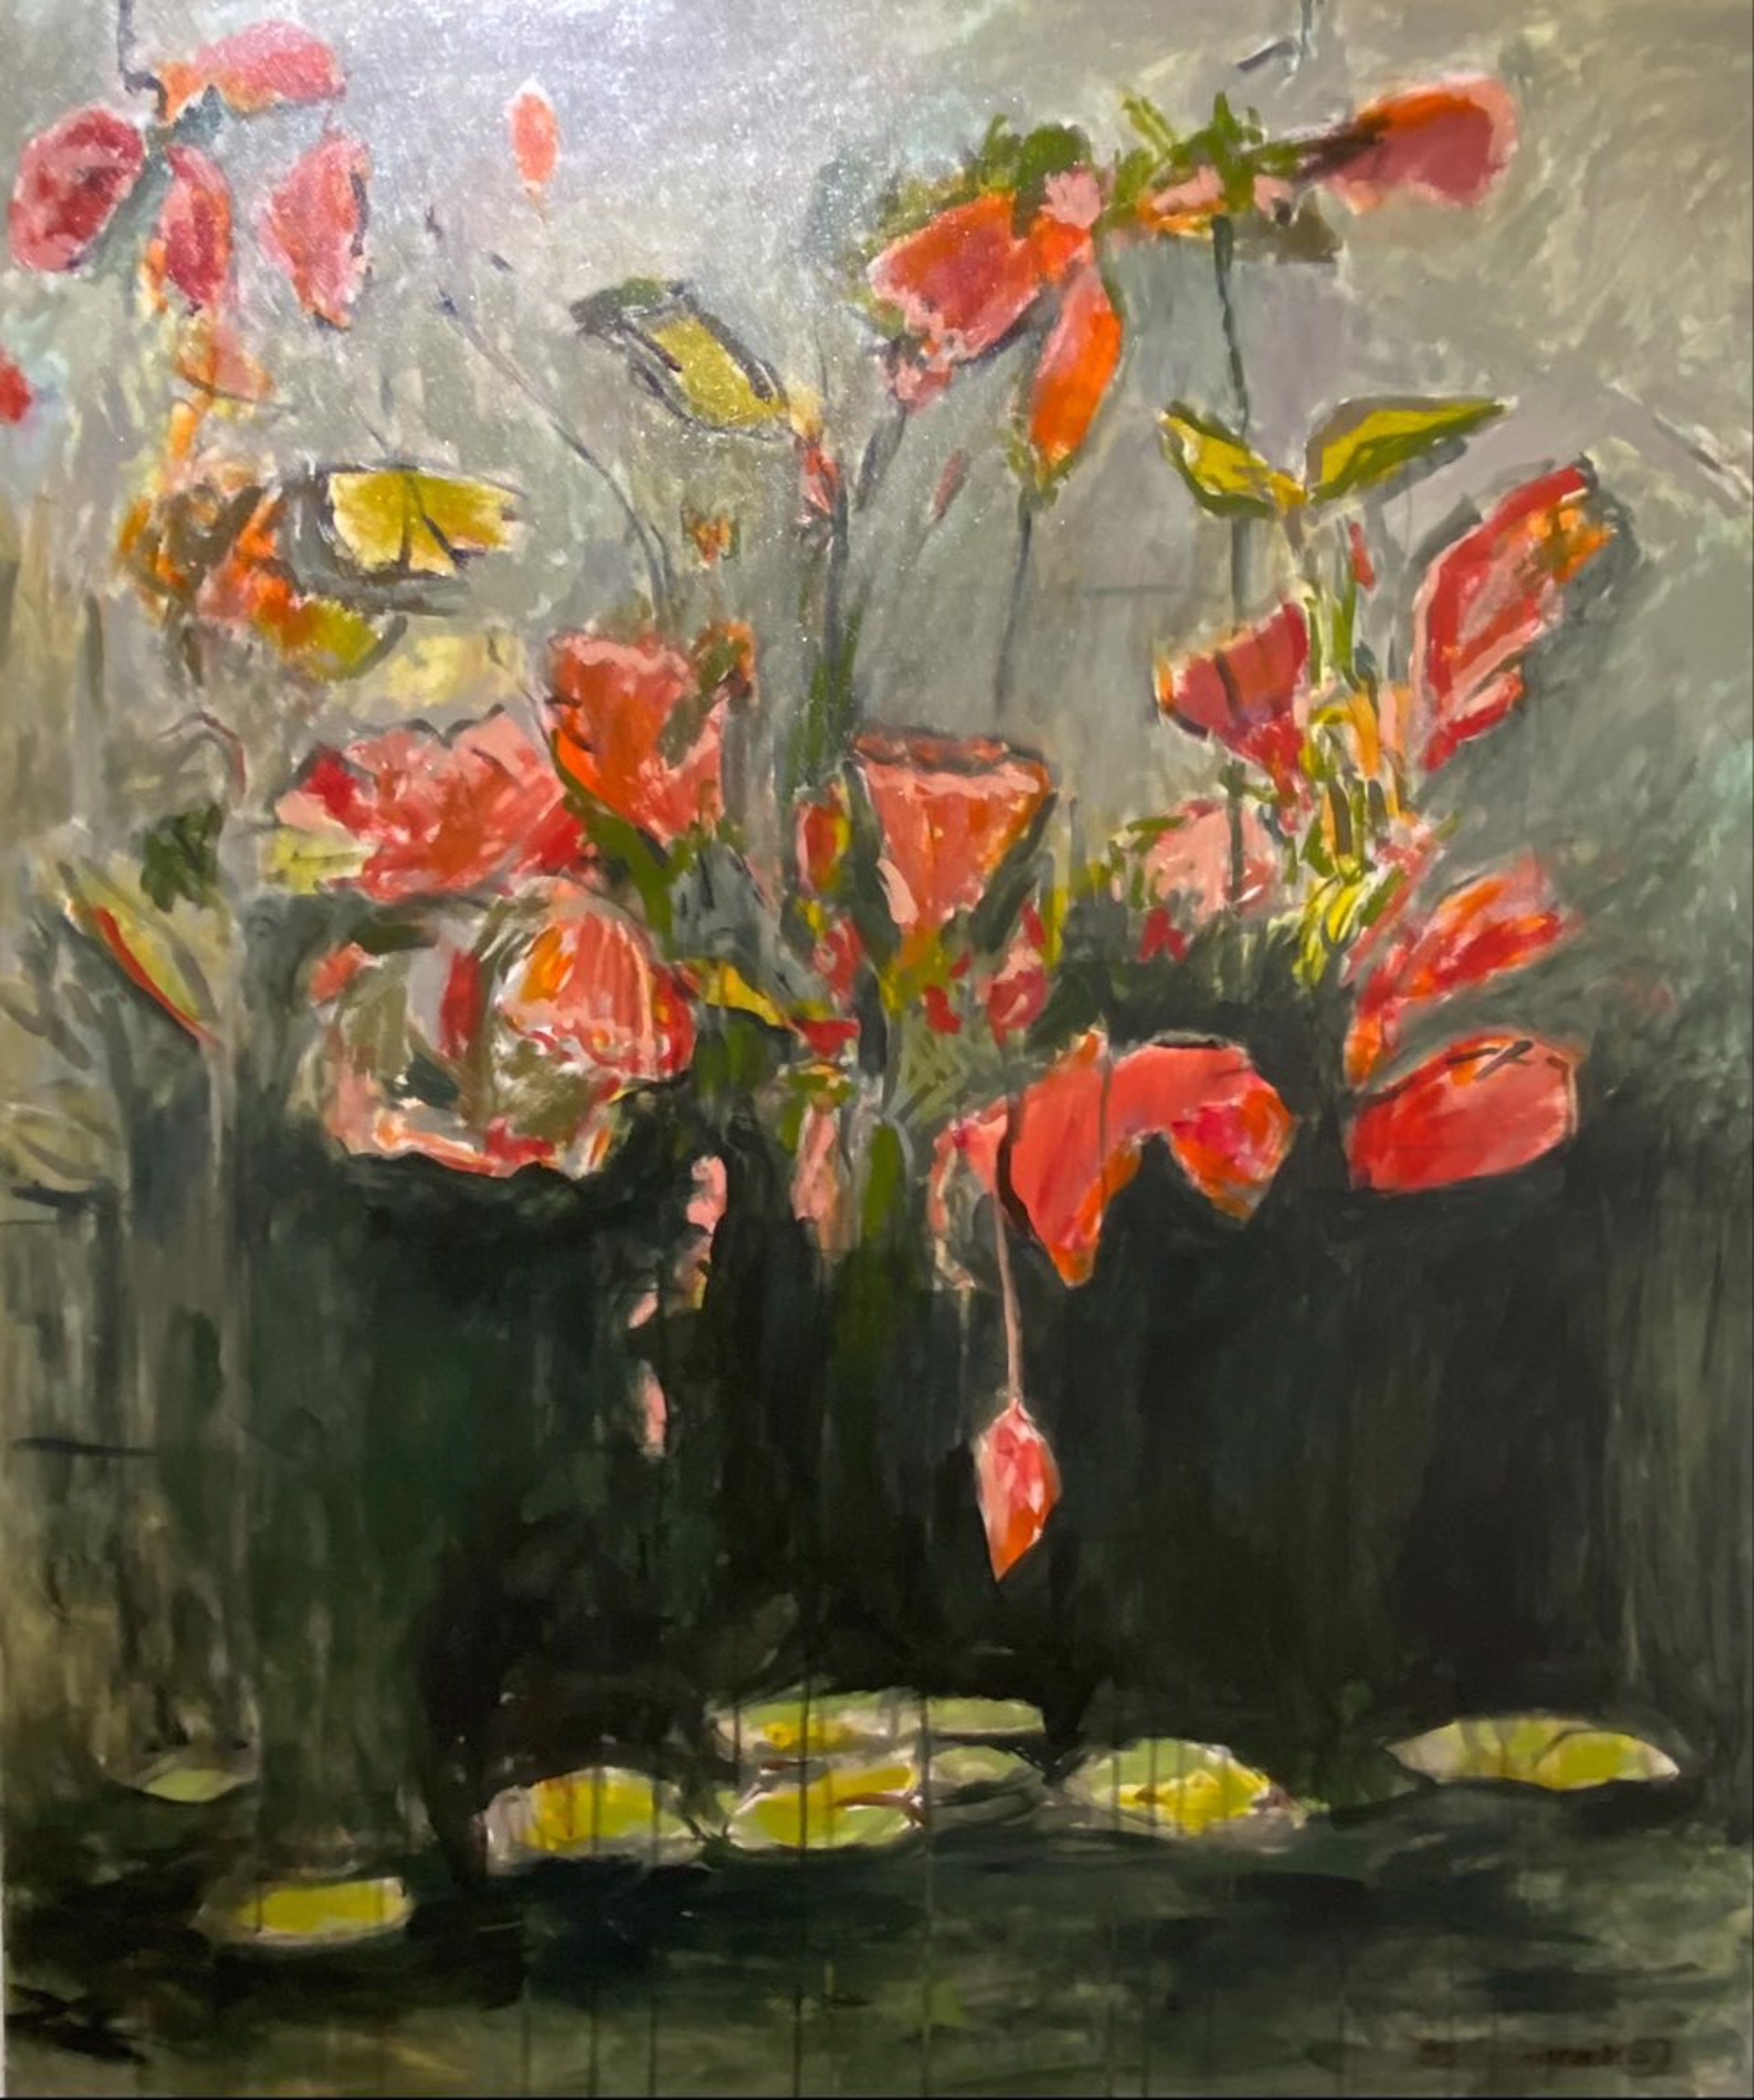 Nocturnal Swamp Lilies by Billie Bourgeois